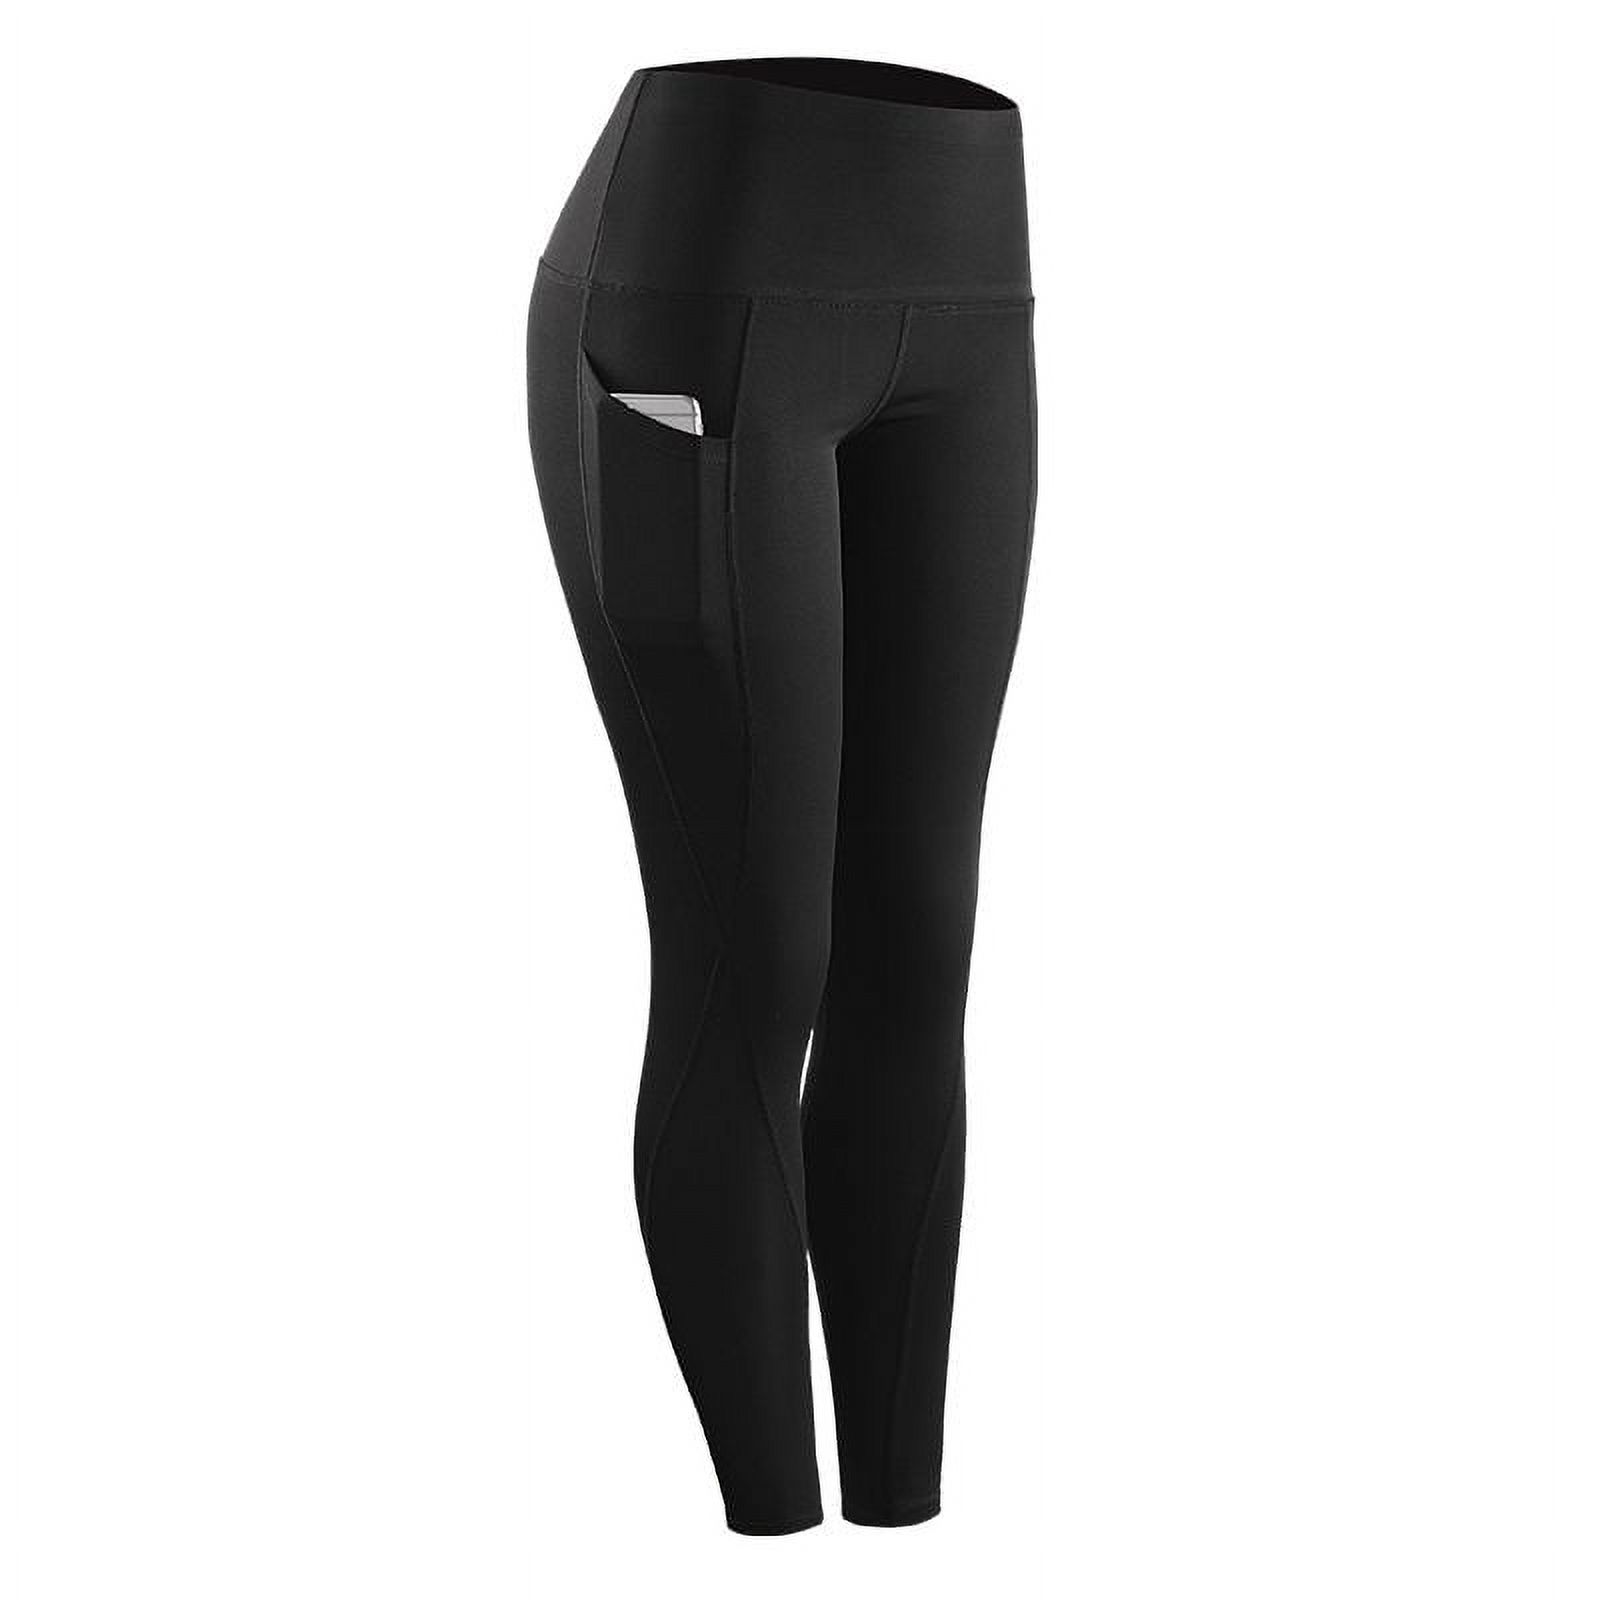 High Elastic Leggings Pant Women Solid Stretch Compression Sportswear Casual Yoga Jogging Leggings Pants With Pocket - image 2 of 6